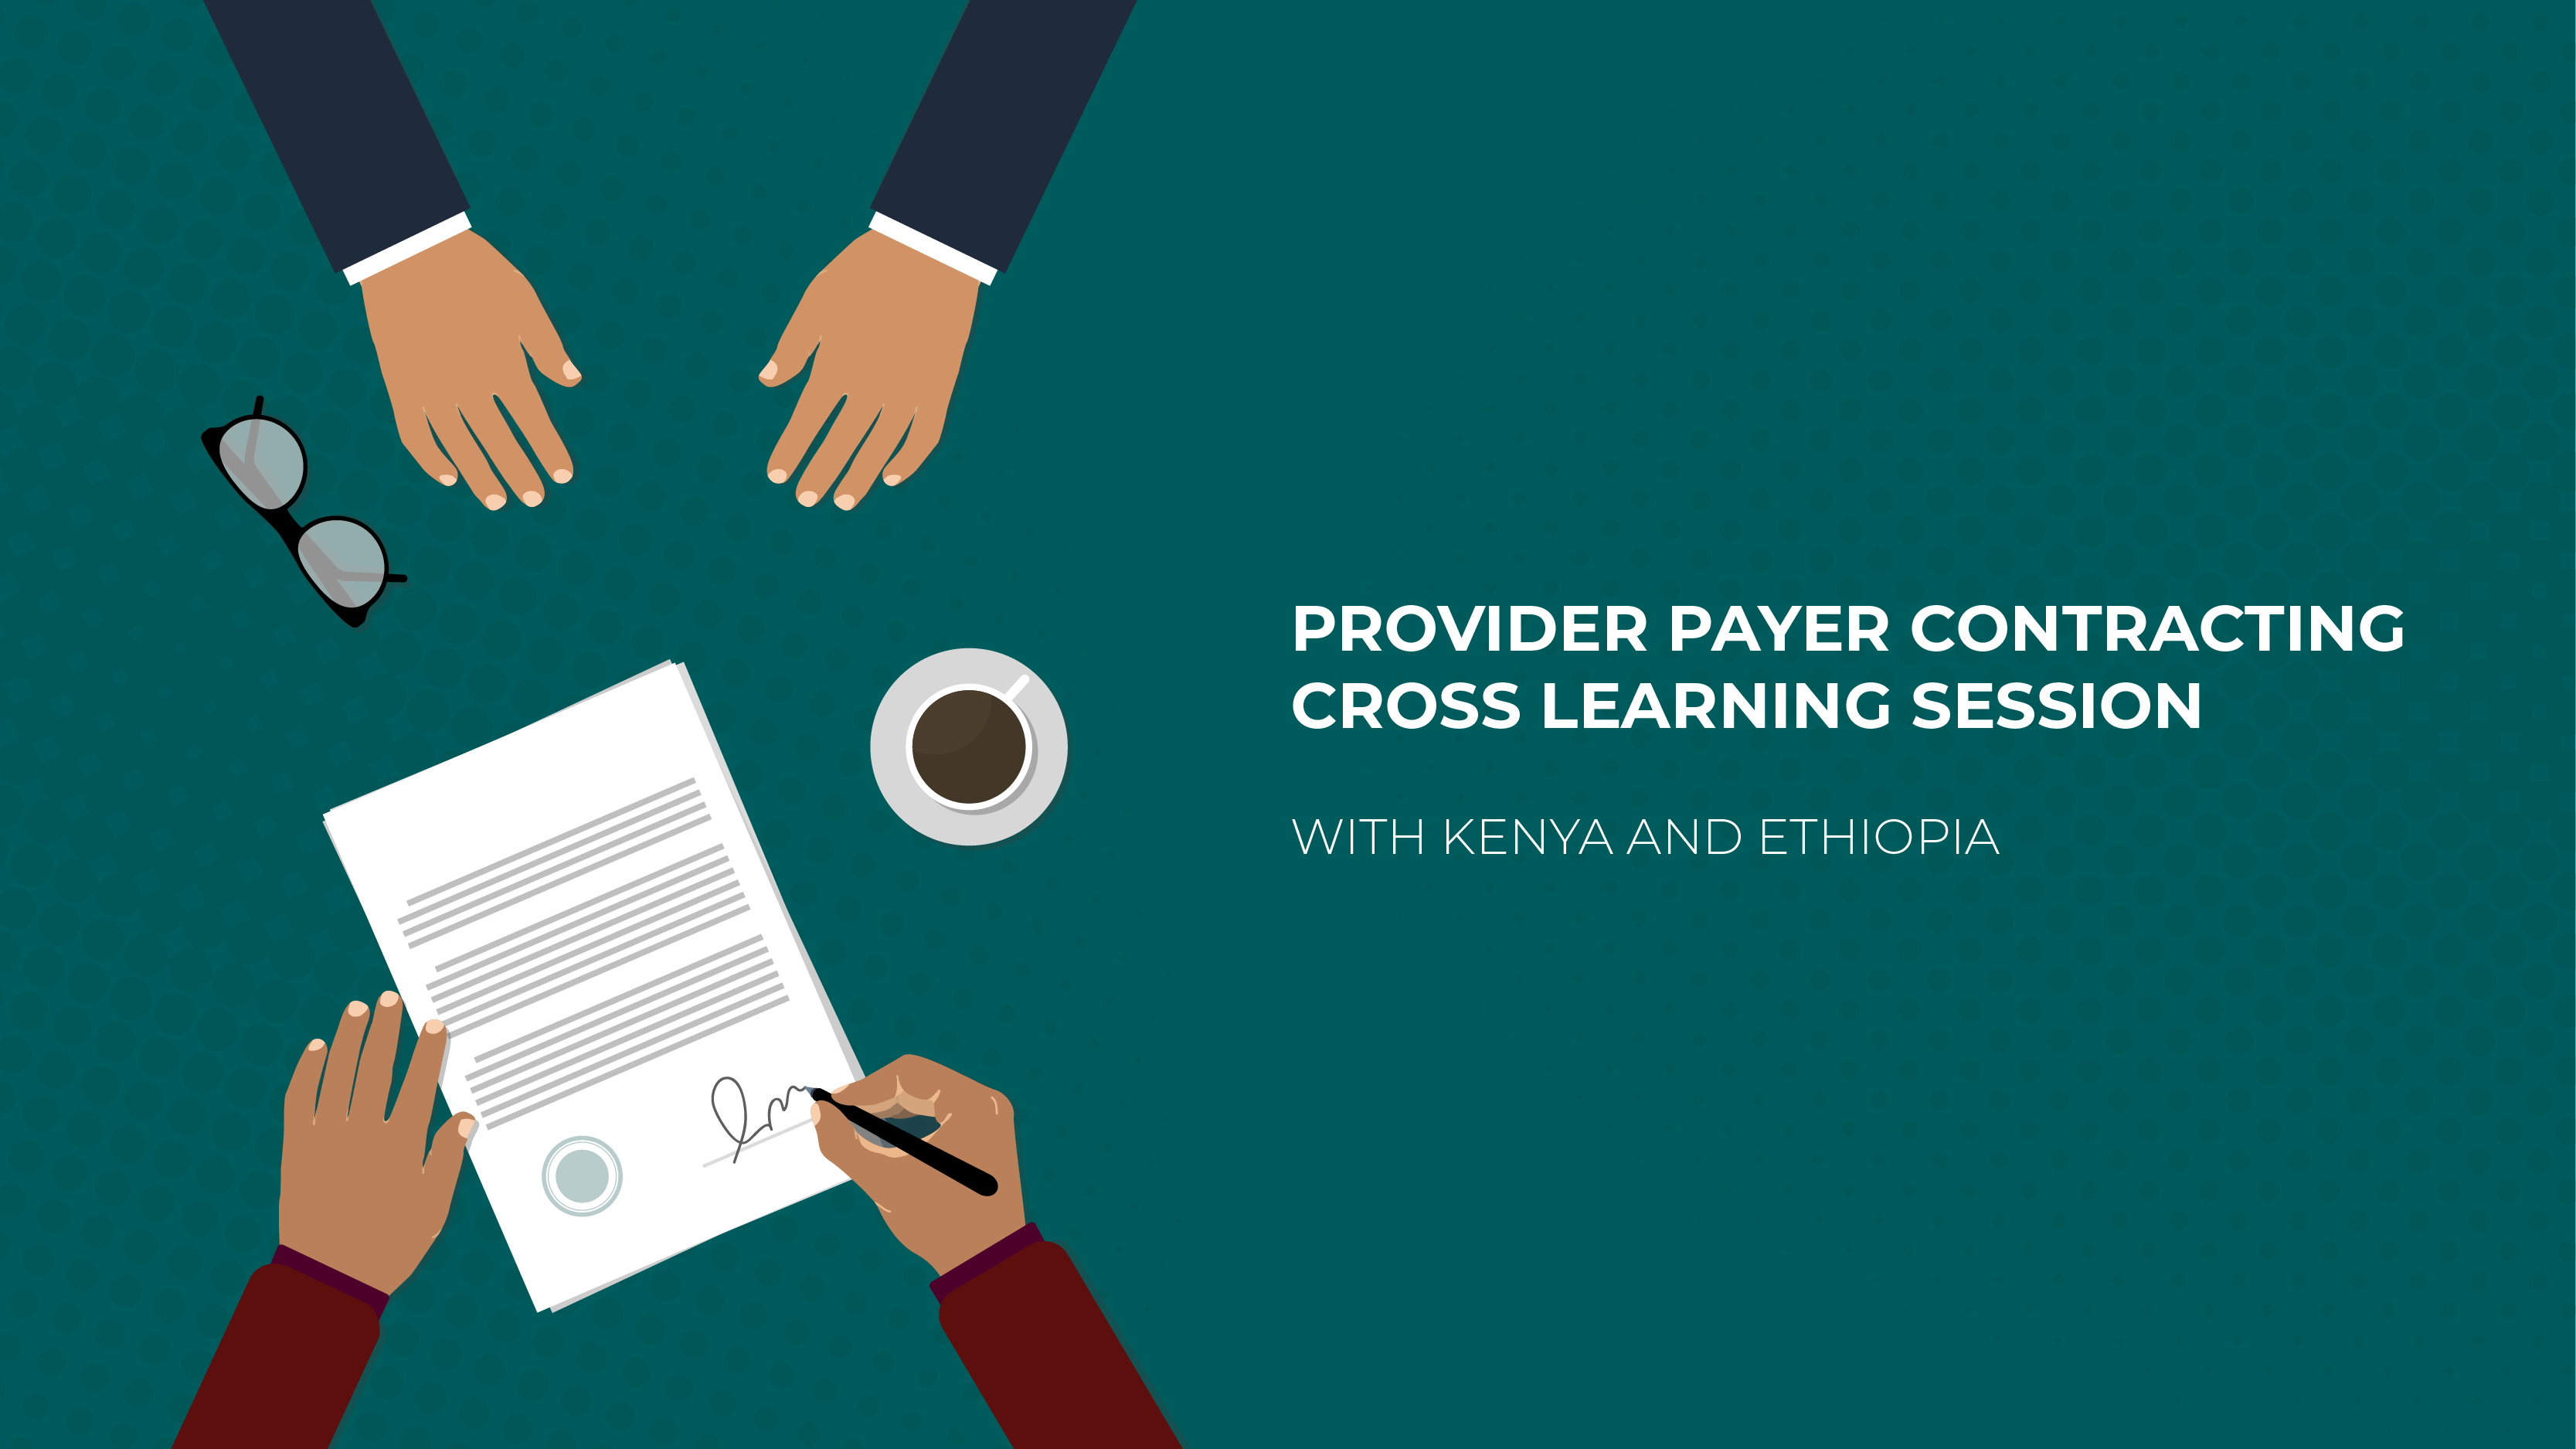 Private Provider Contracting Cross-Learning Session Key Messages